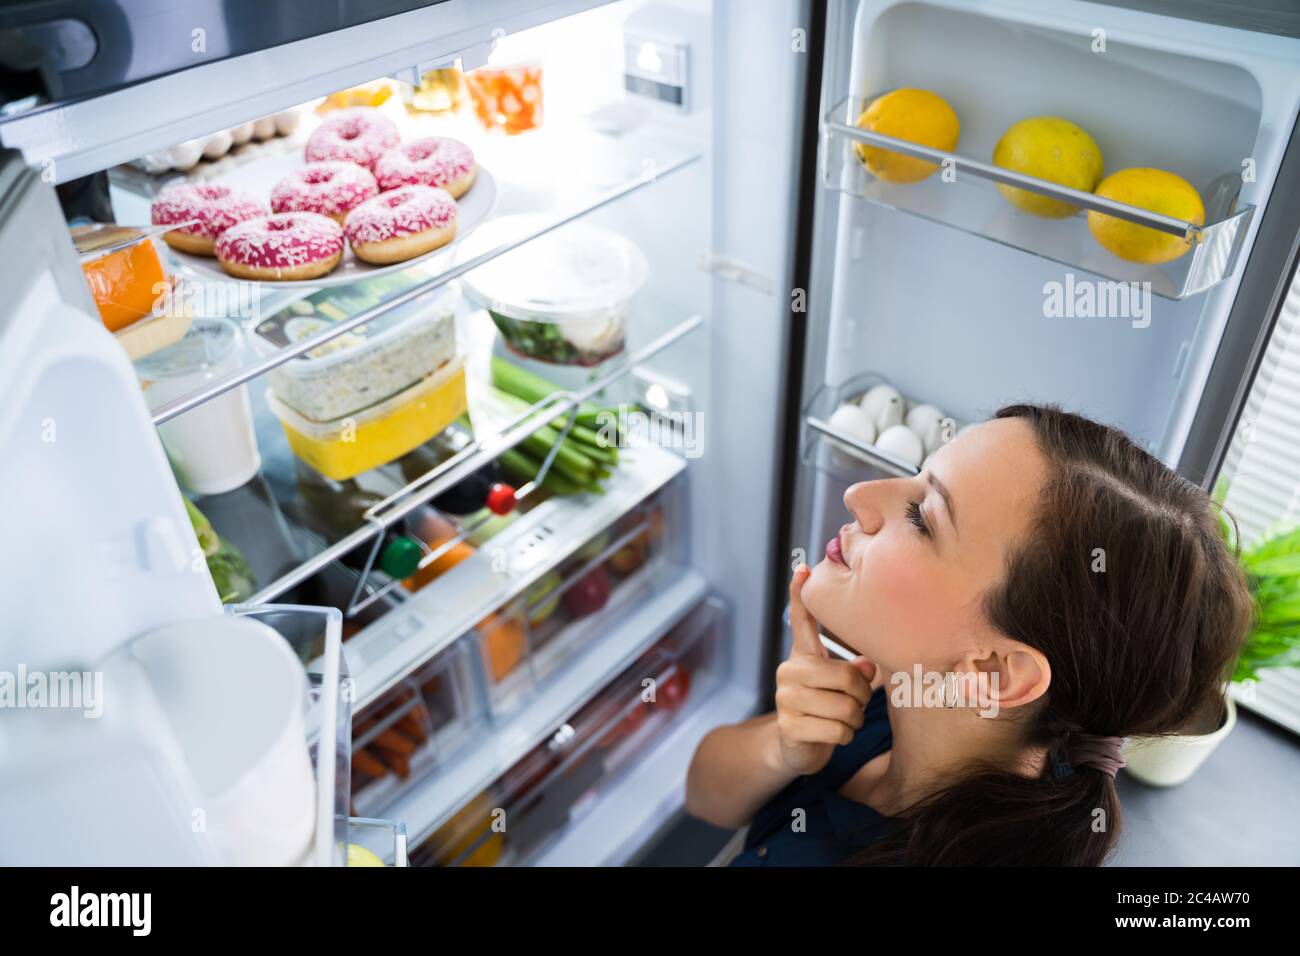 Hungry Woman Looking For Food In Kitchen At Home Stock Photo